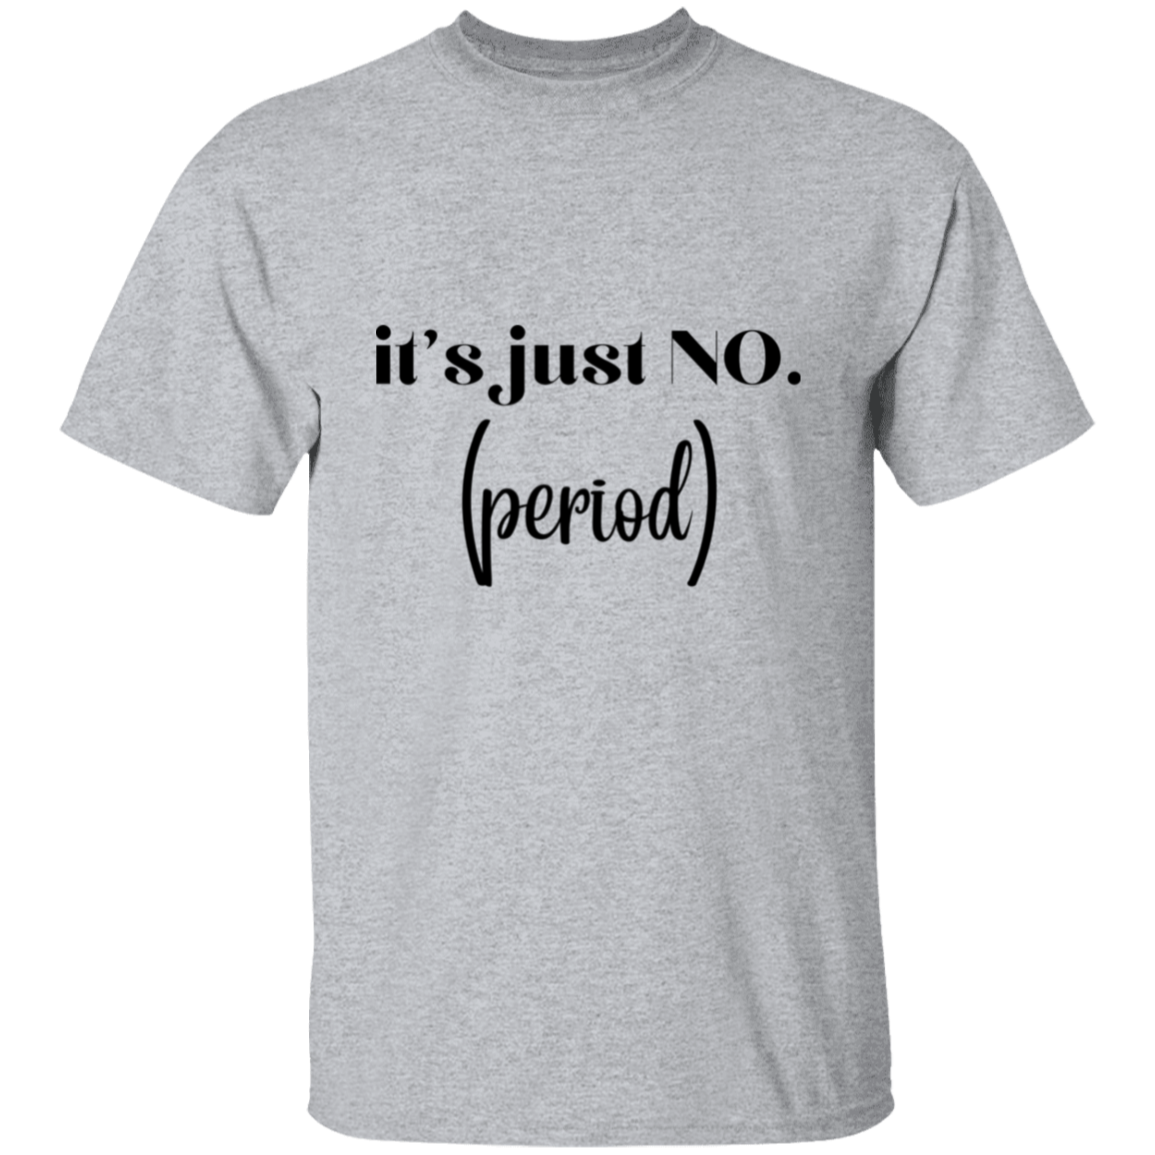 it's just no. (period) T-Shirt